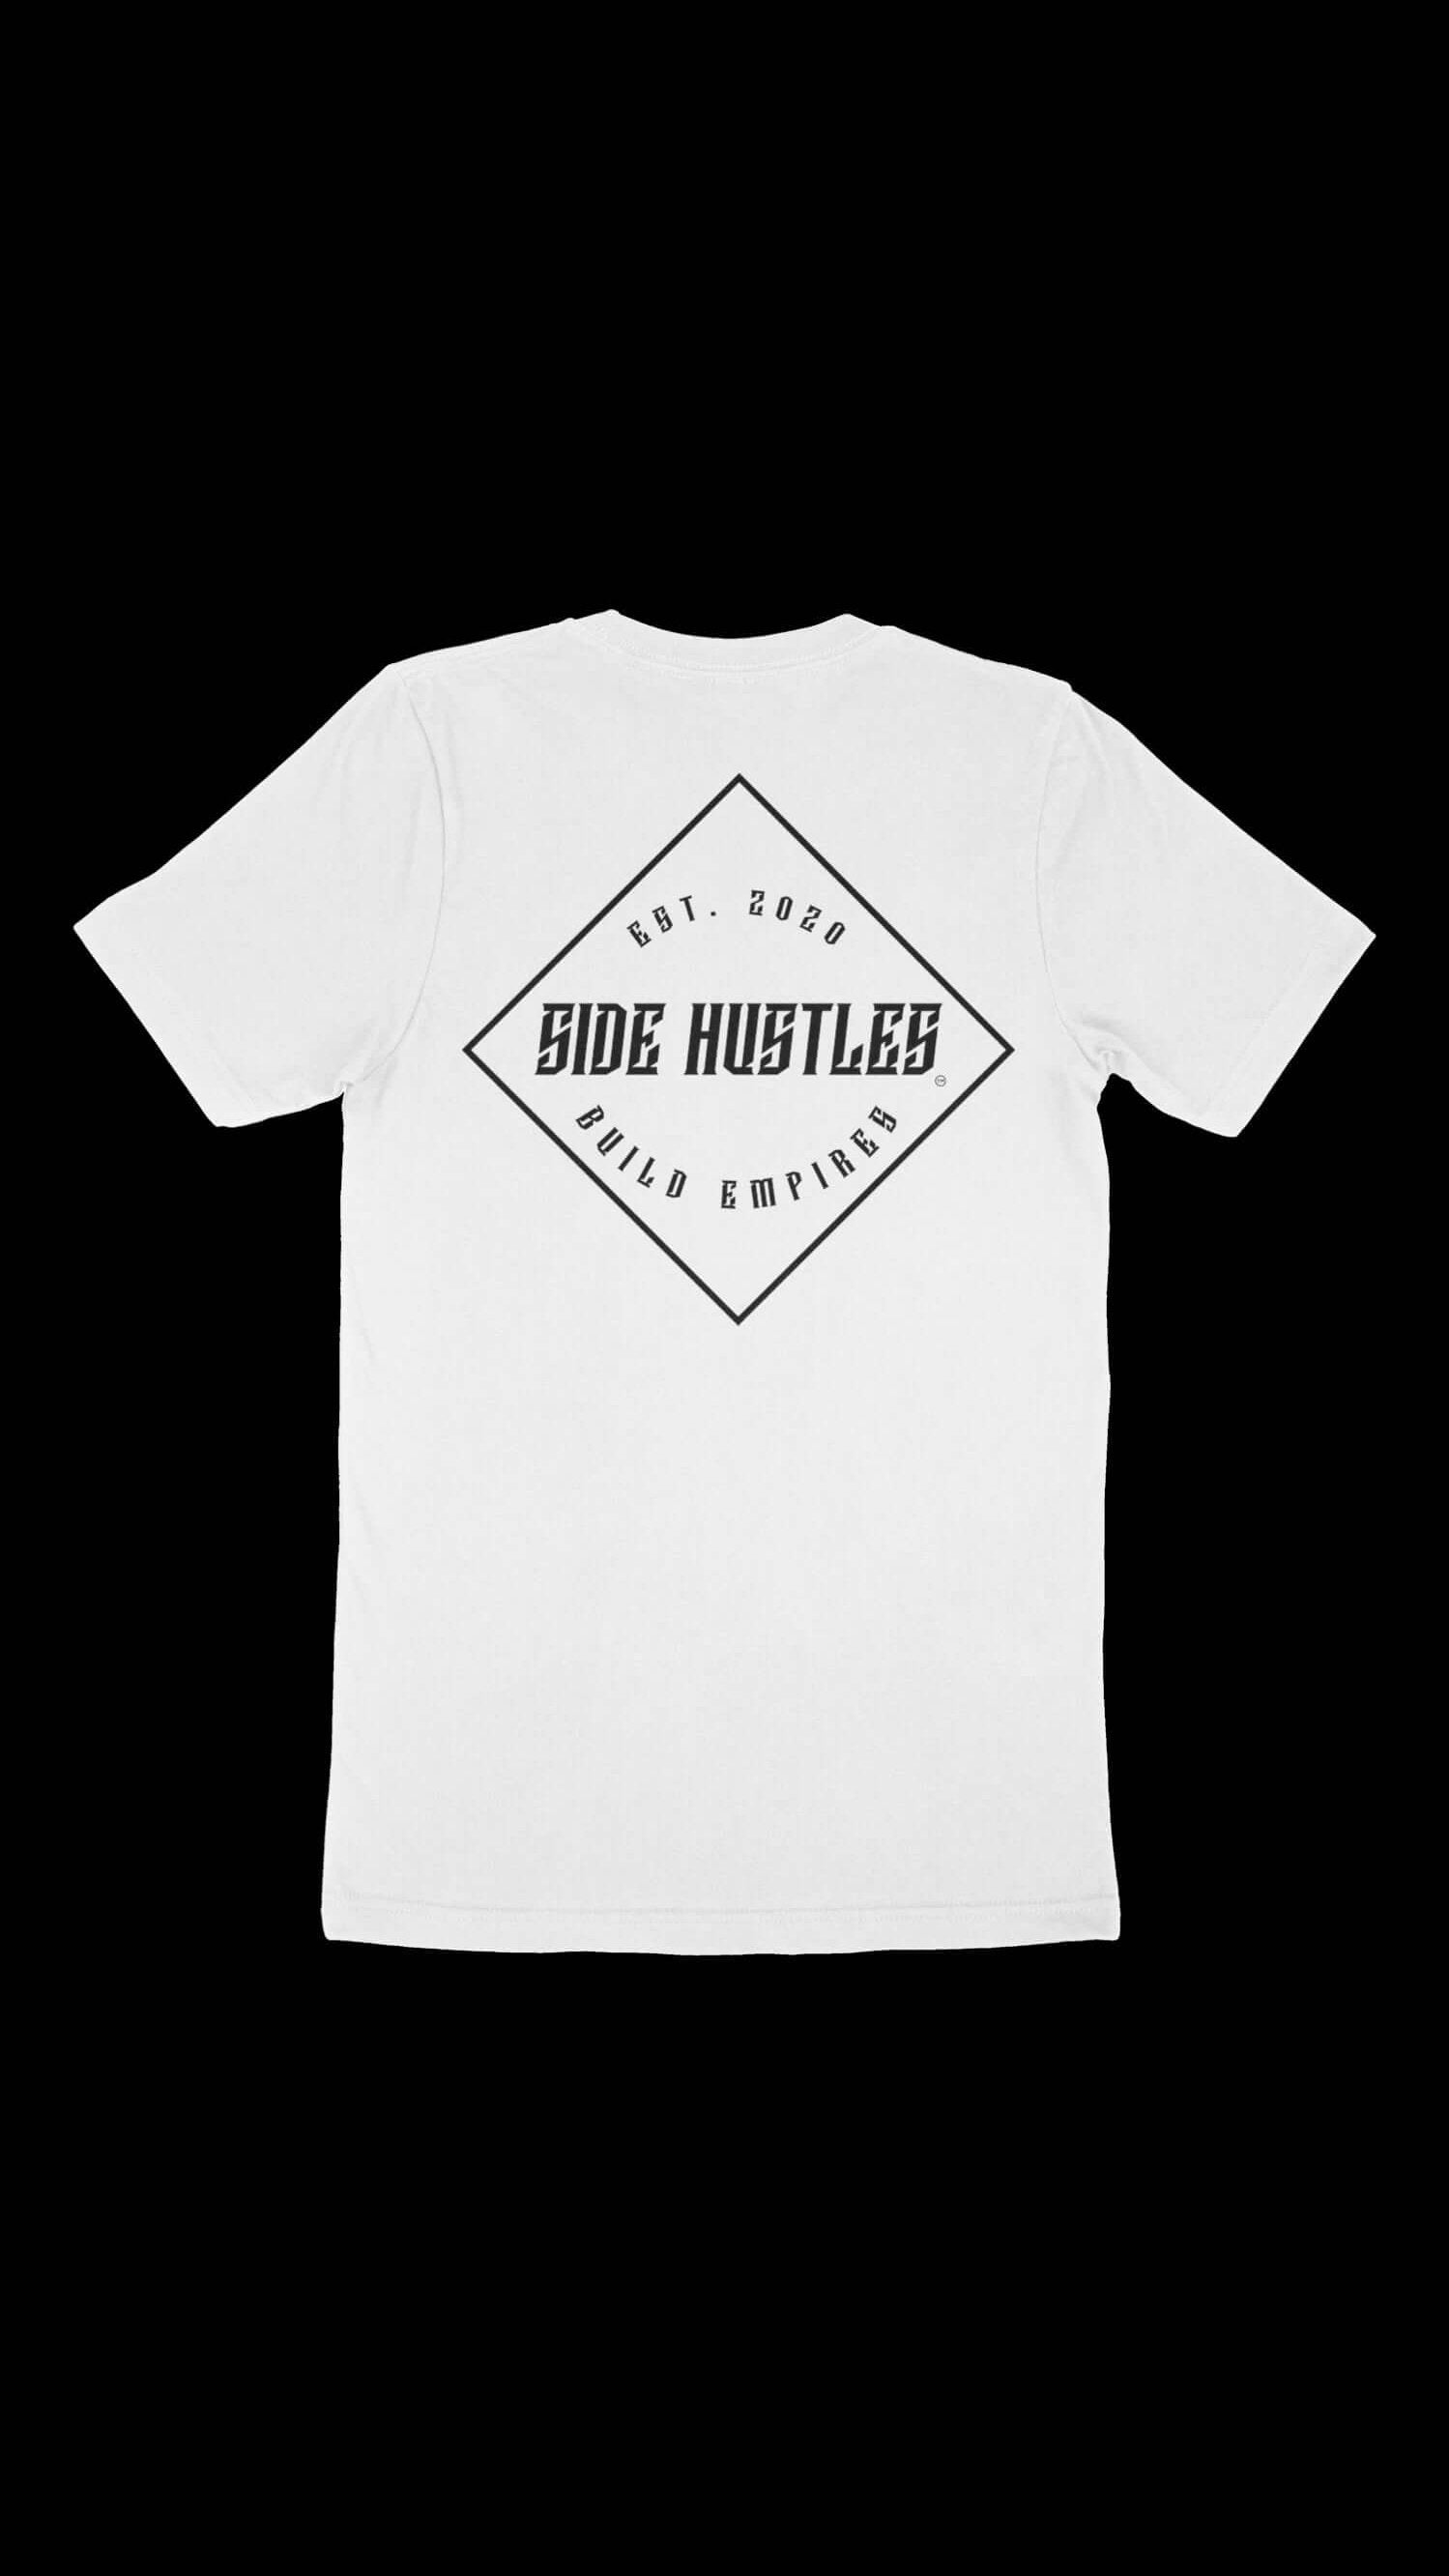 White screen printed t shirt with motivational side hustle print